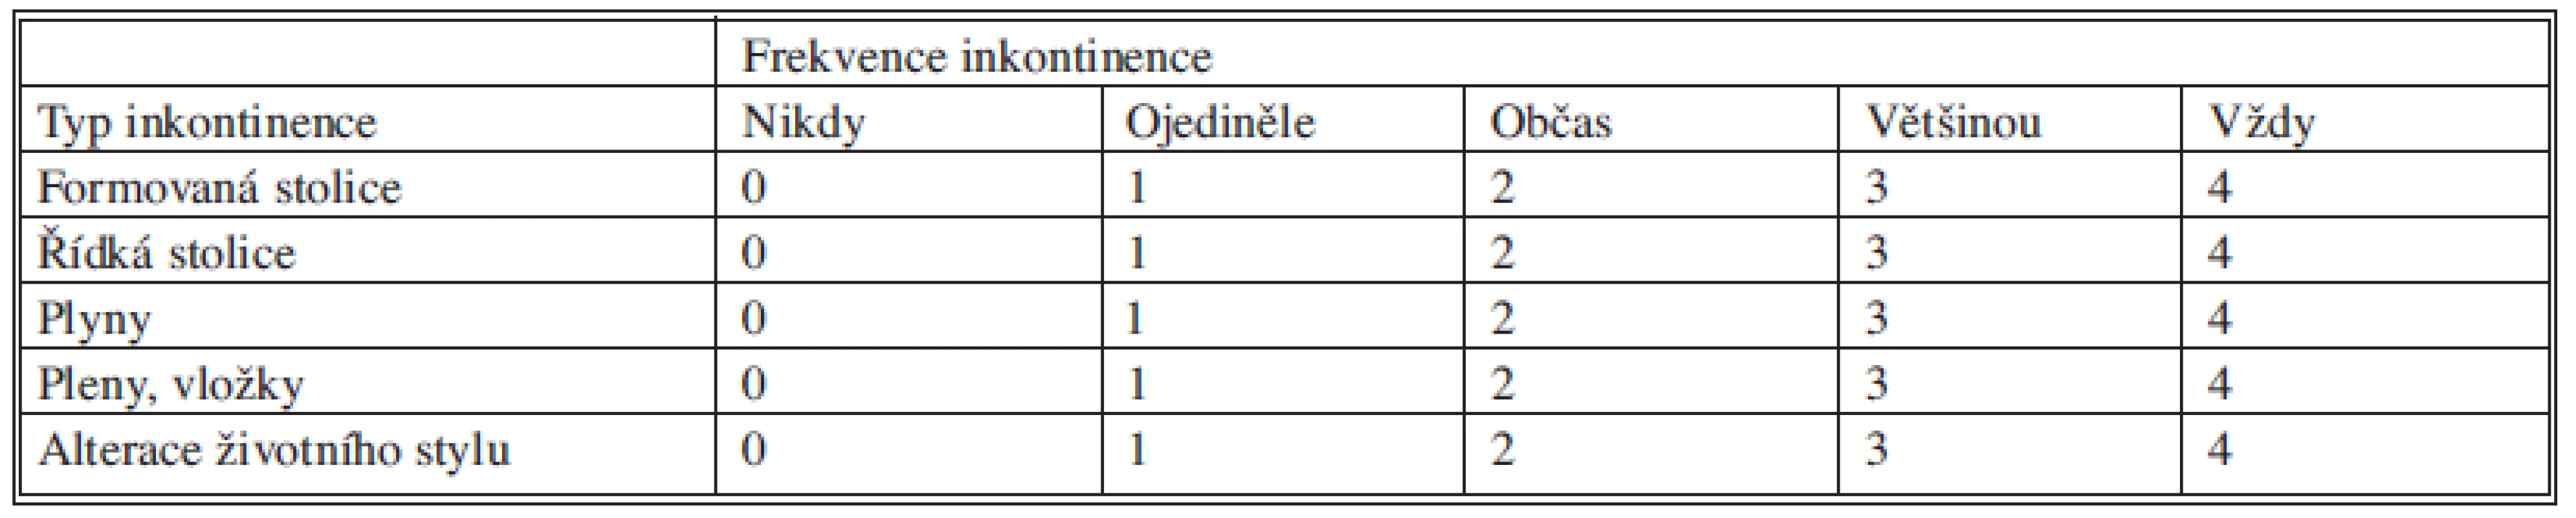 Použité skóre inkontinence (CCIS – Wexner )
Tab. 4. Used incontinence score (CCIS – Wexner )